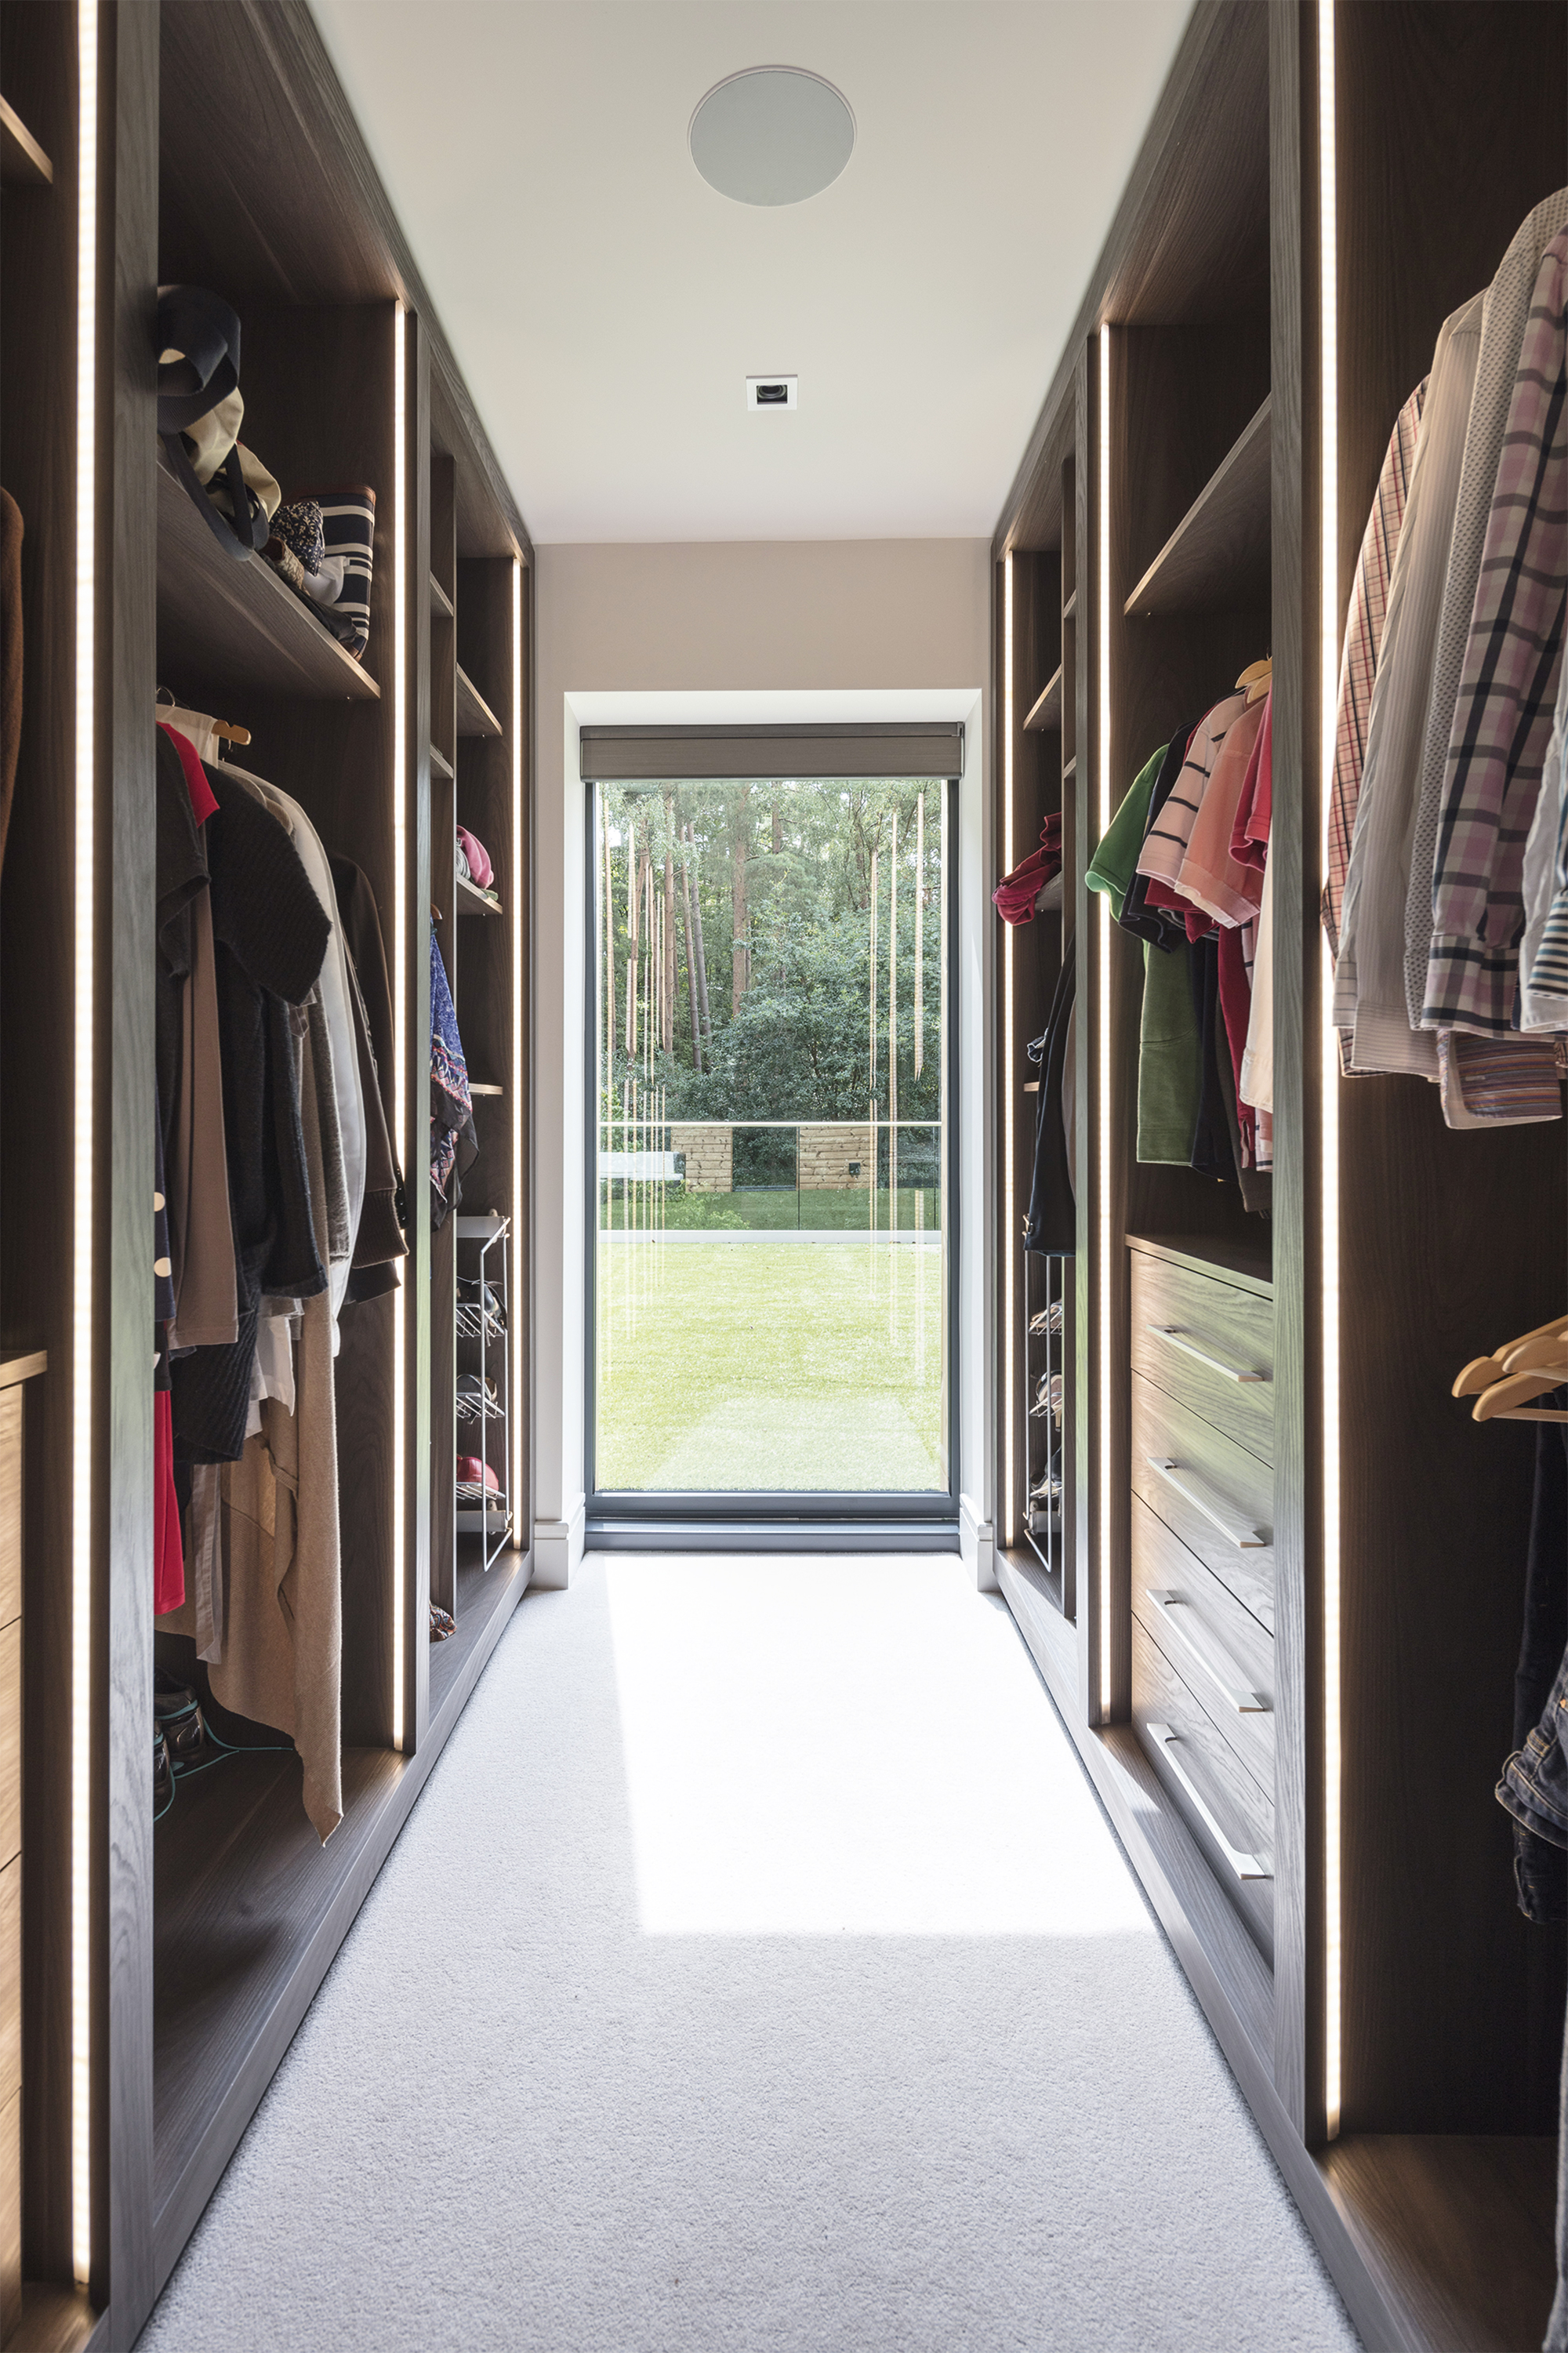 Walk-in closet Bathroom with separate walk-in shower in fully integrated smart home